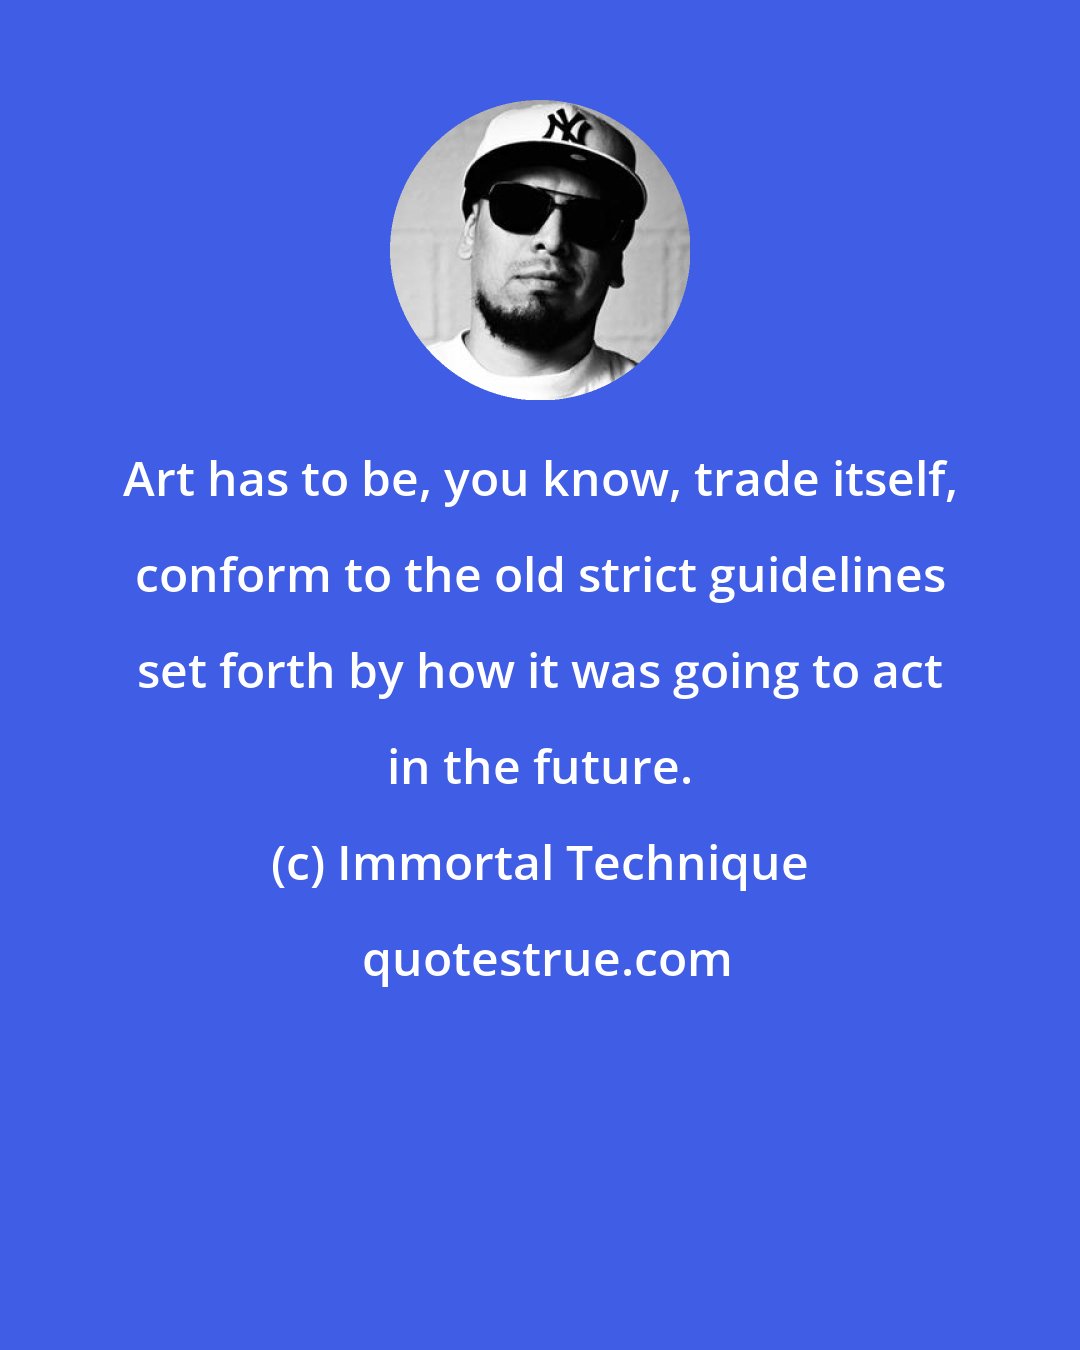 Immortal Technique: Art has to be, you know, trade itself, conform to the old strict guidelines set forth by how it was going to act in the future.